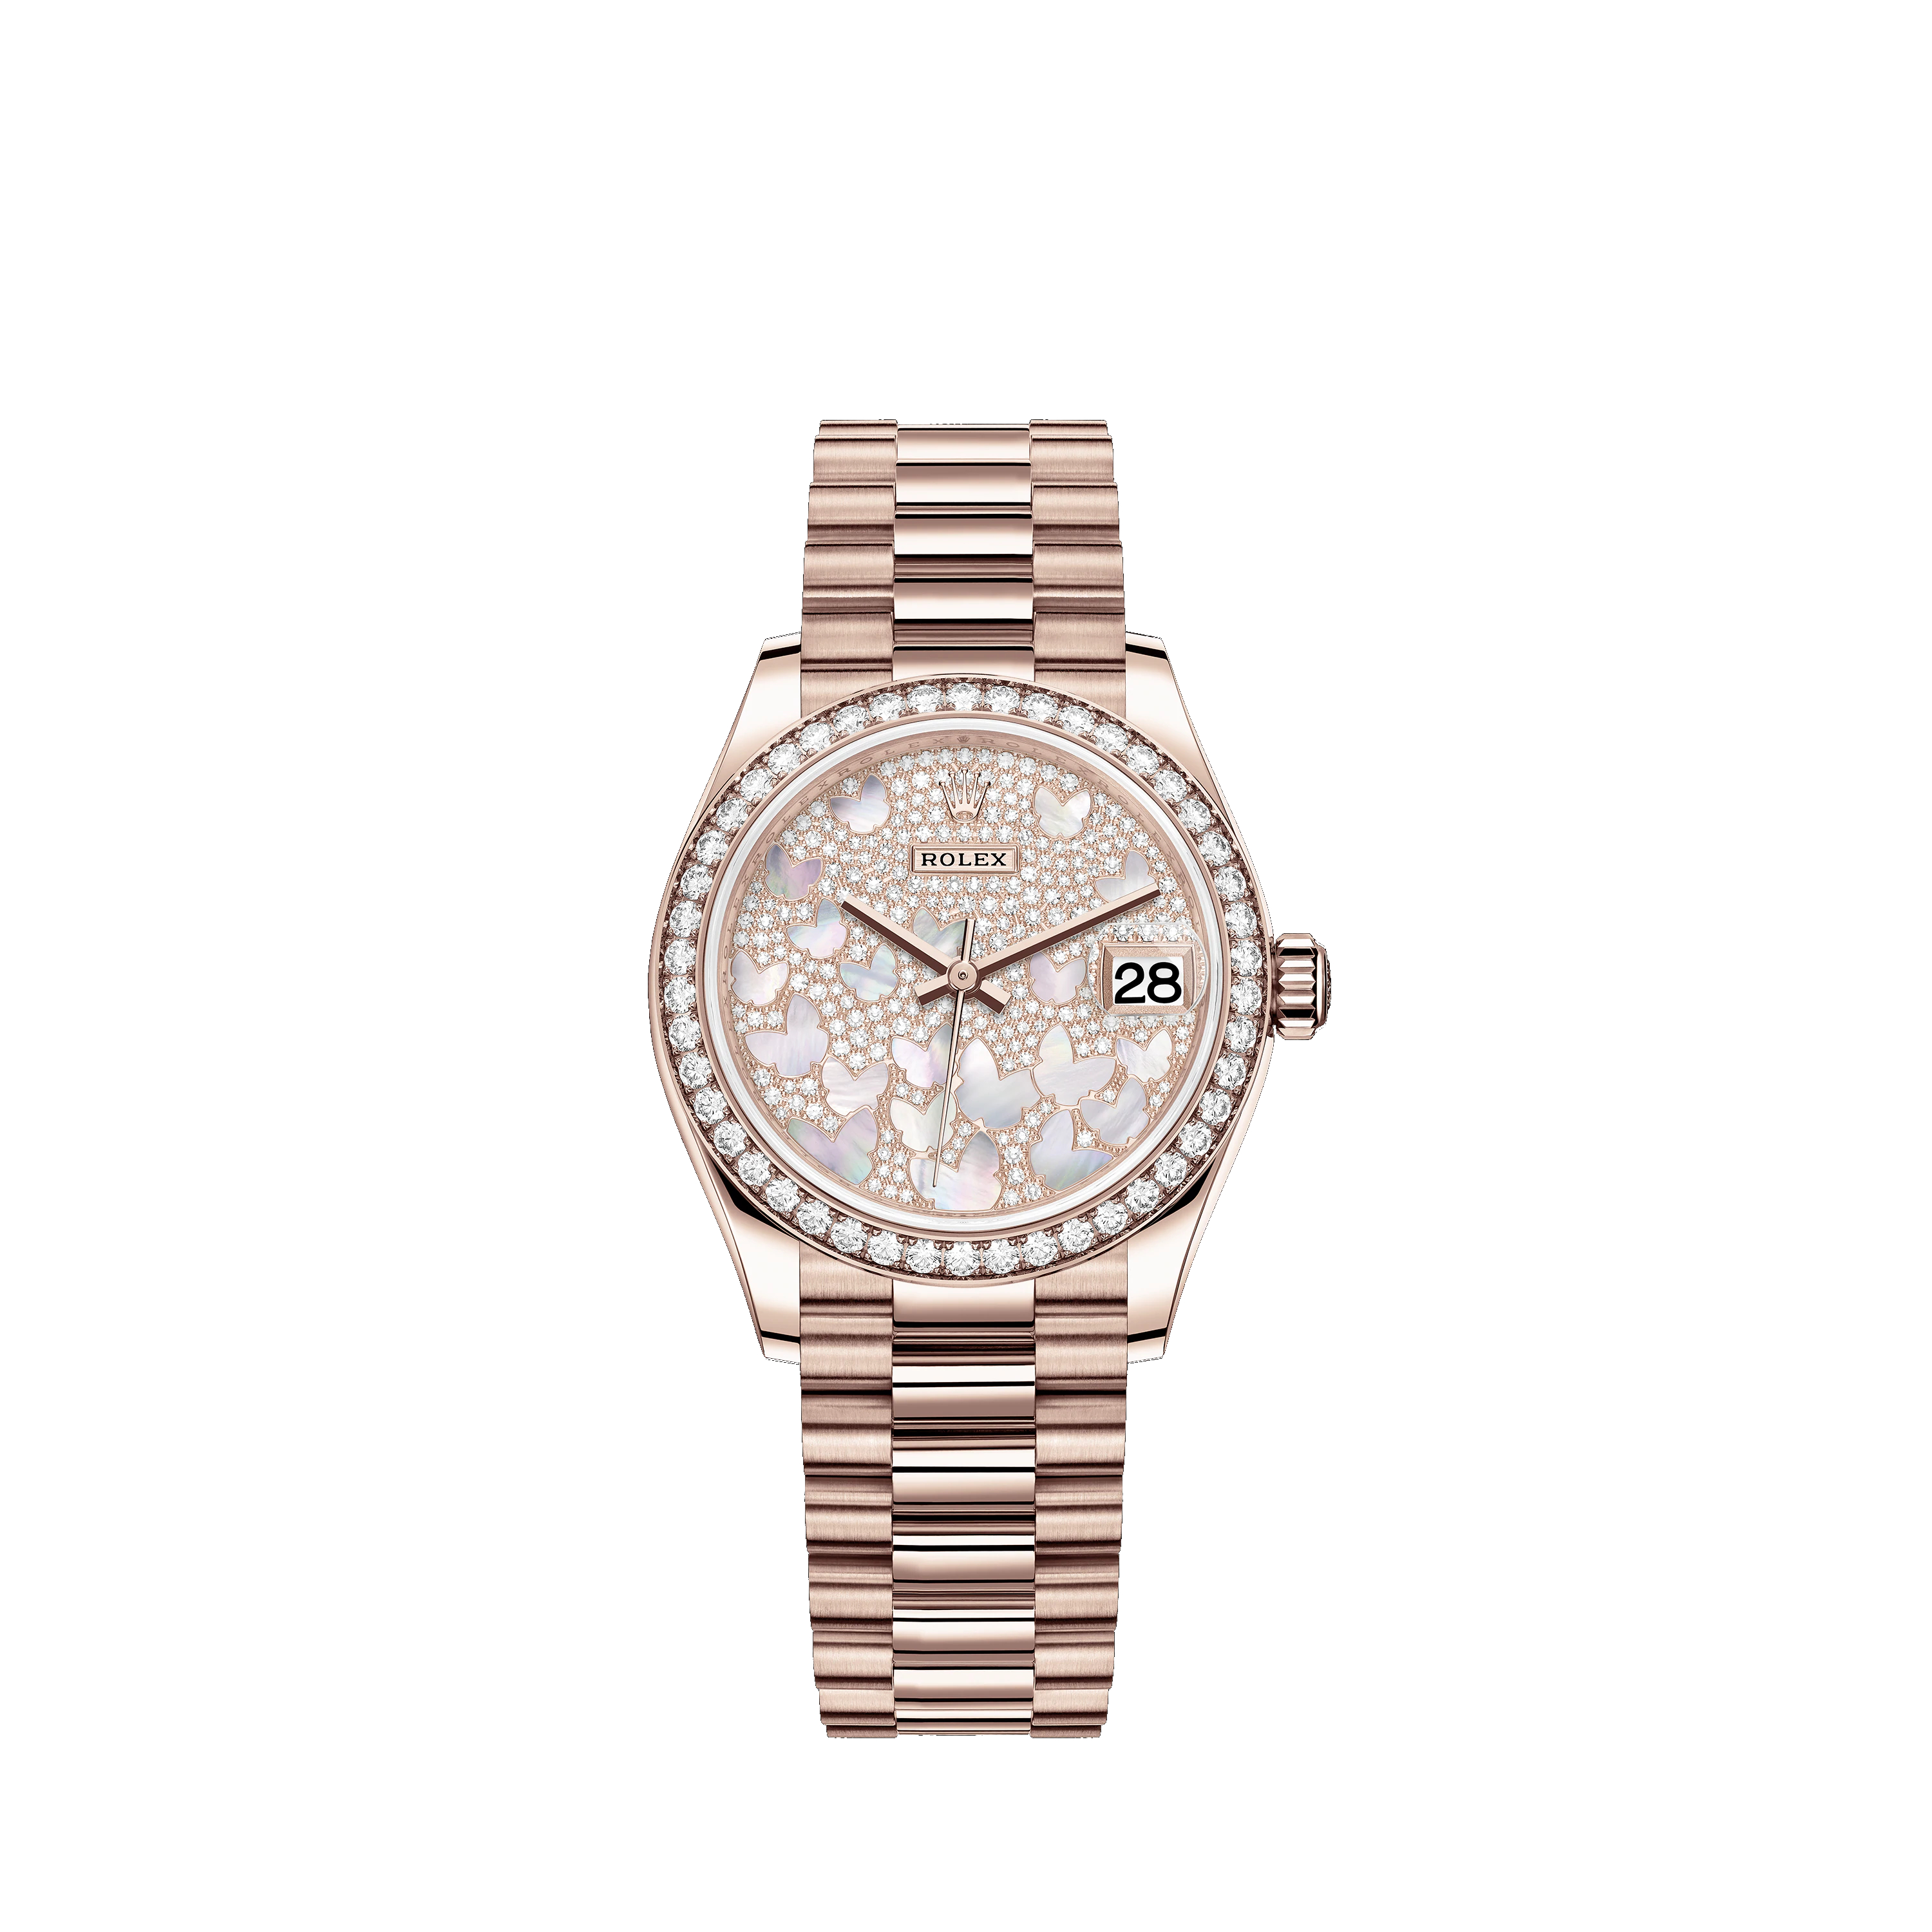 Datejust 31 278285RBR Rose Gold & Diamonds Watch (Paved, Mother-of-Pearl Butterfly)